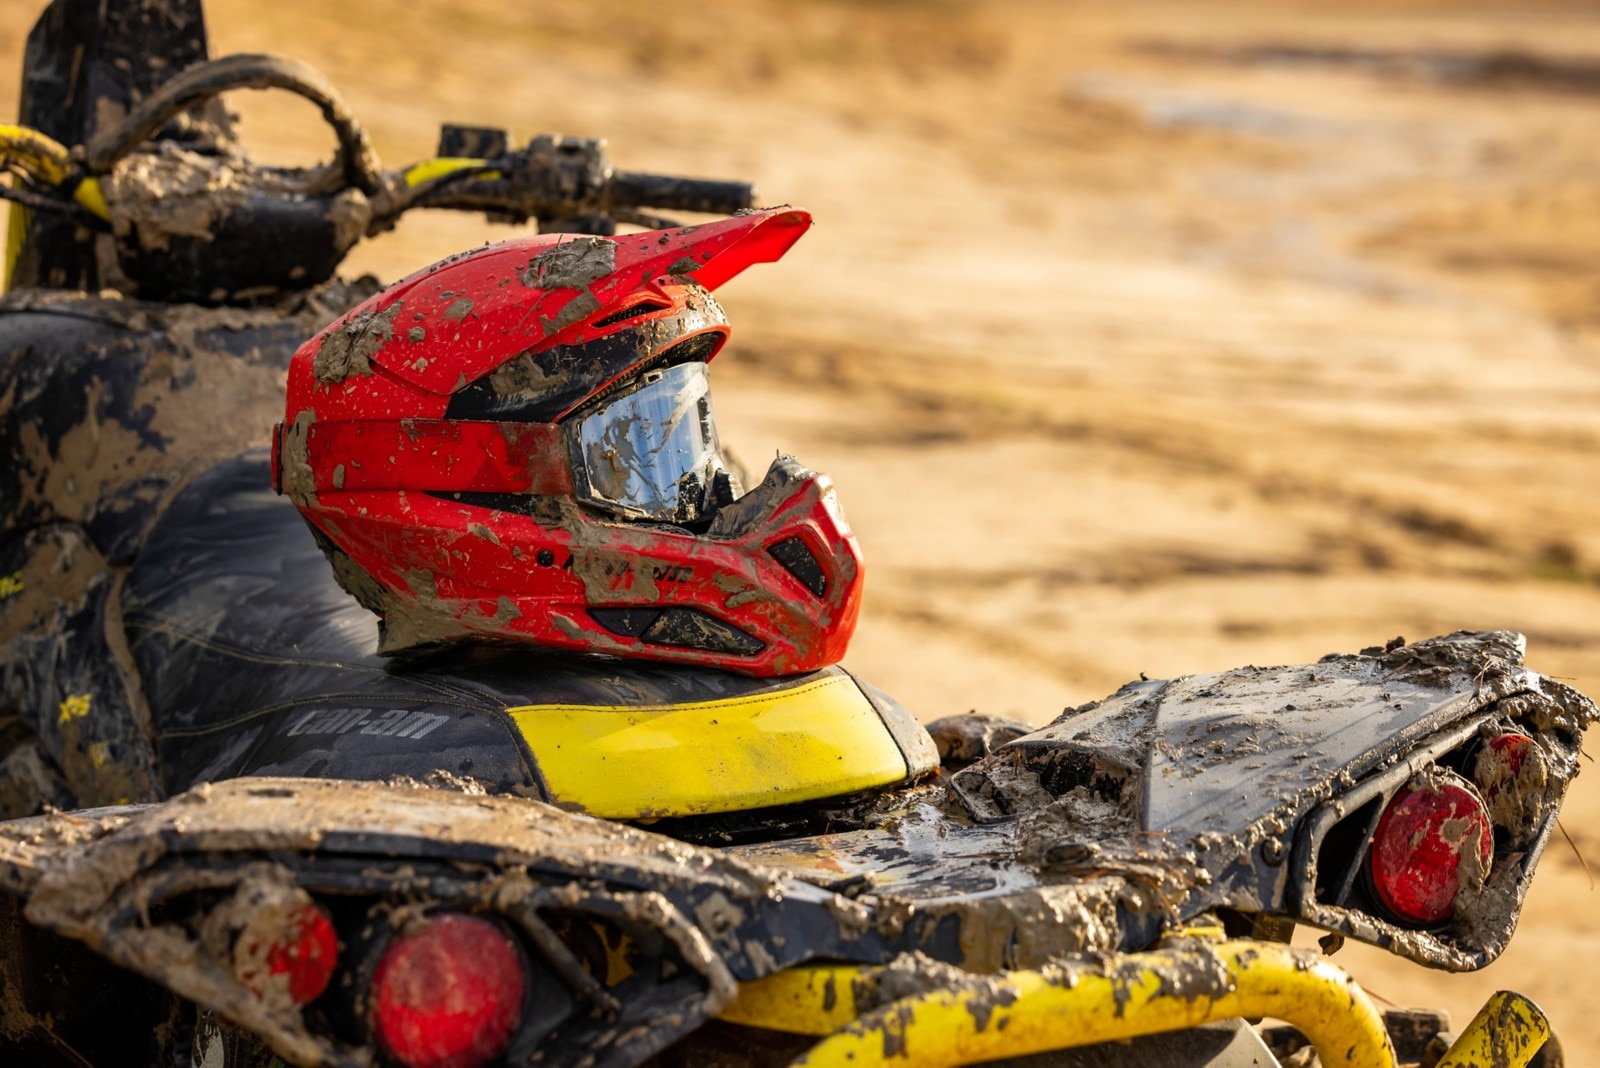 Explore the all new Can-Am Pyra MX lightweight helmet.